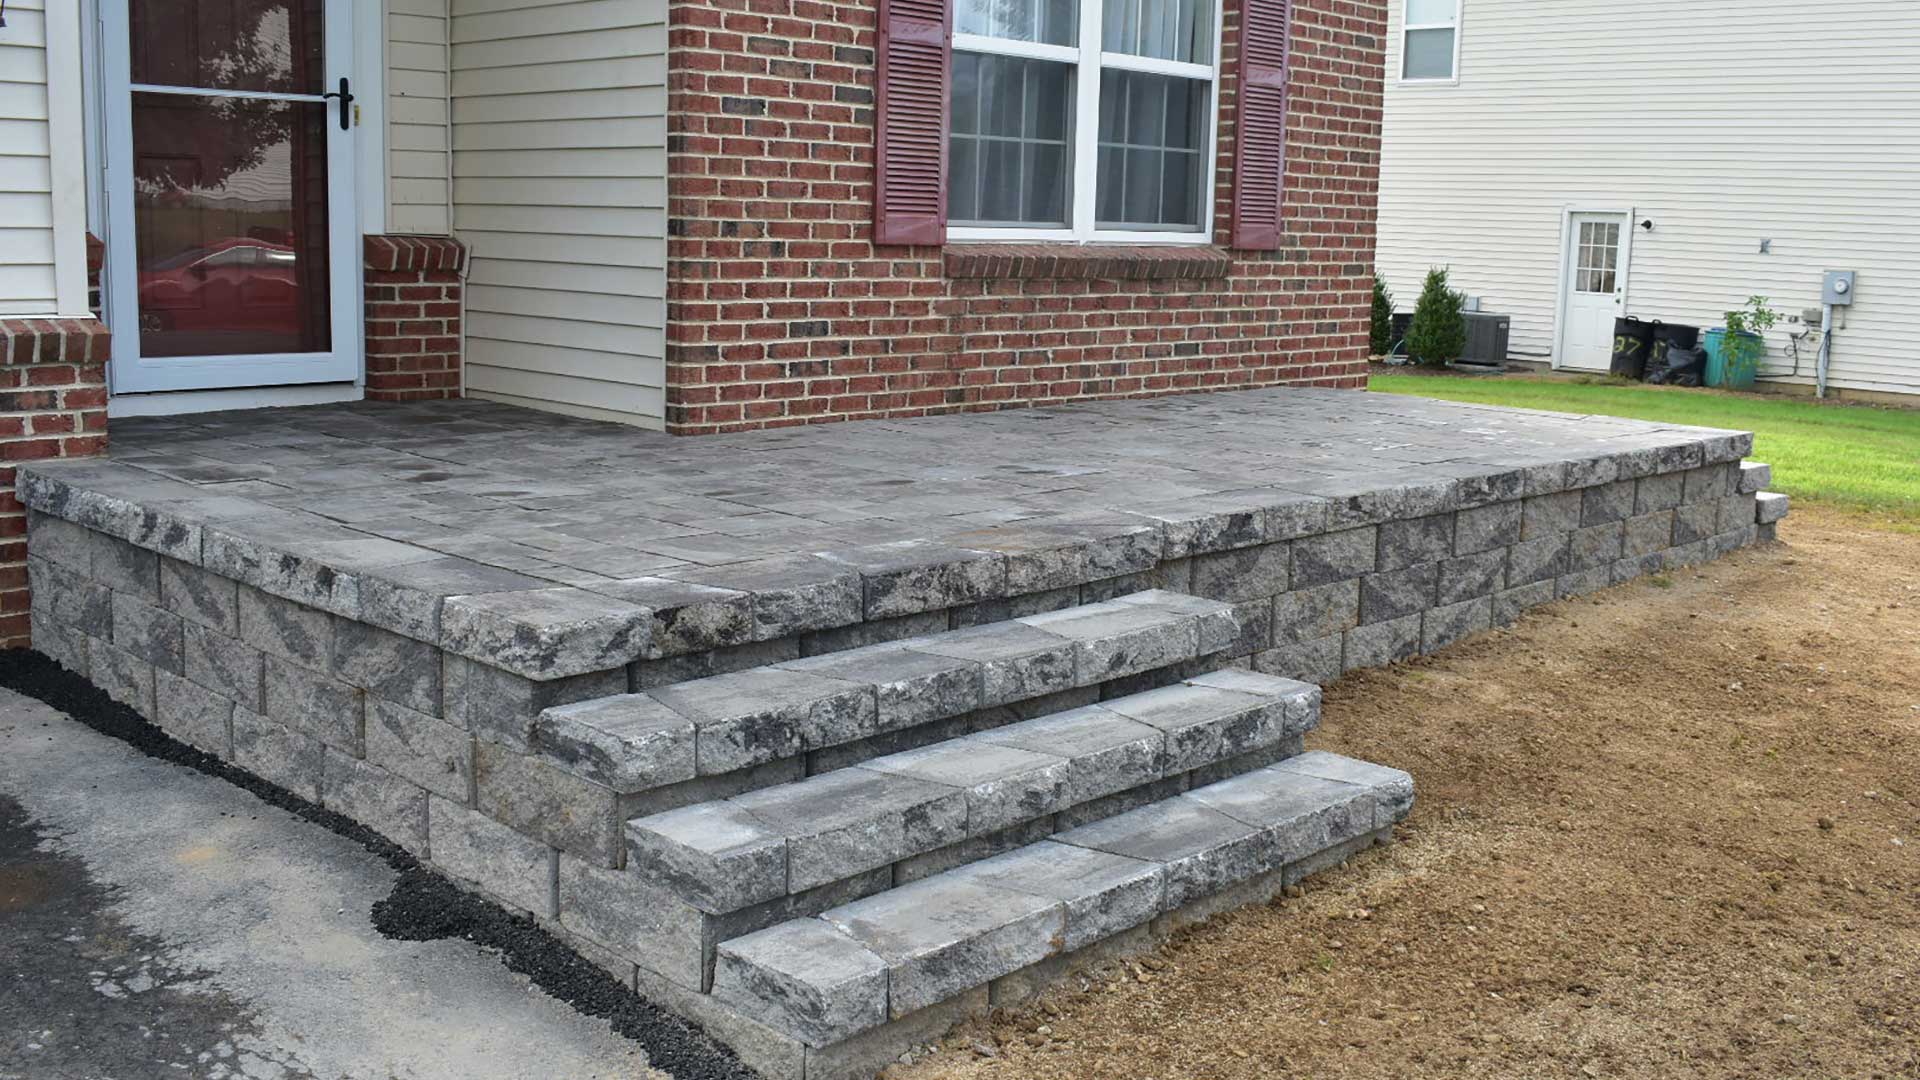 Steps and patio installed for front door in Oxford, NJ.